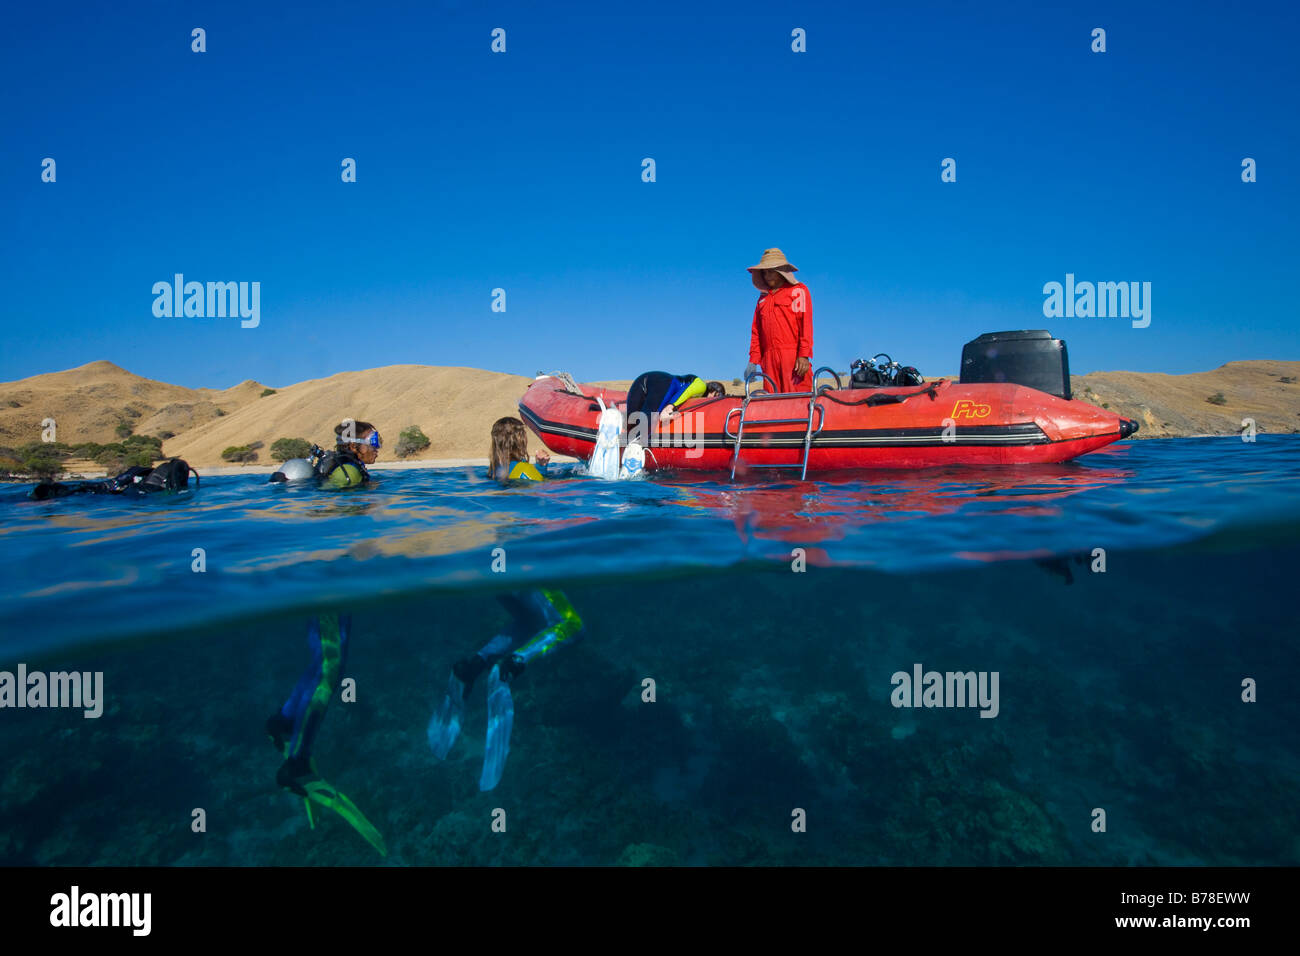 Divers ardously clamber on to the boat after diving, Indonesia, South Asia Stock Photo